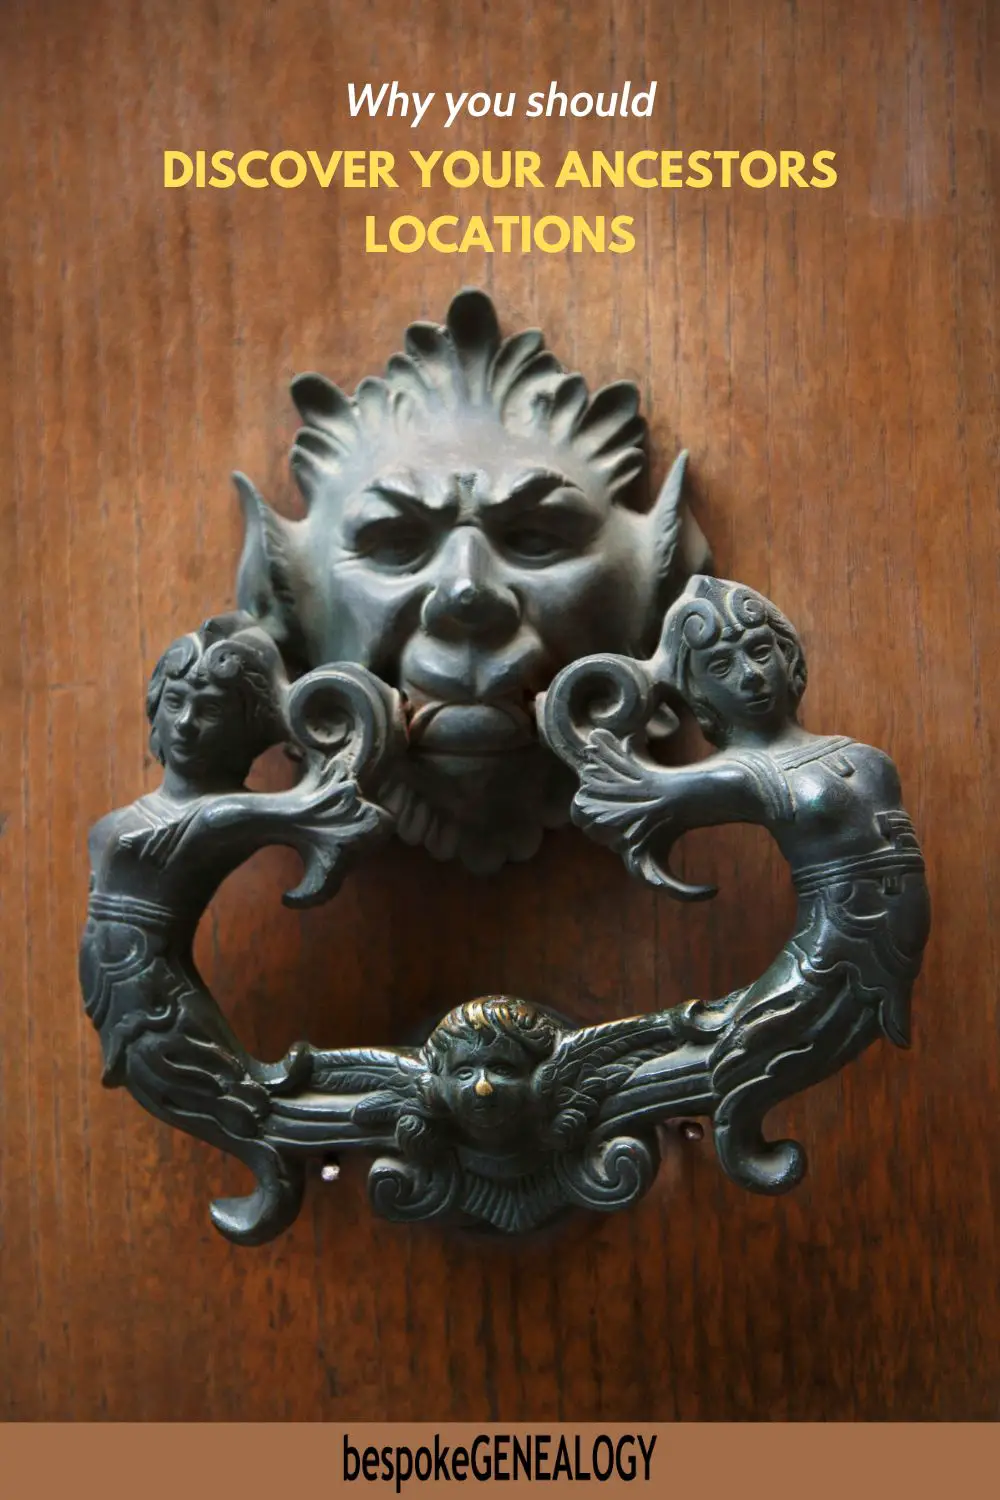 Why you should discover your ancestors locations. Photo of an ornate door knocker on a house front door.